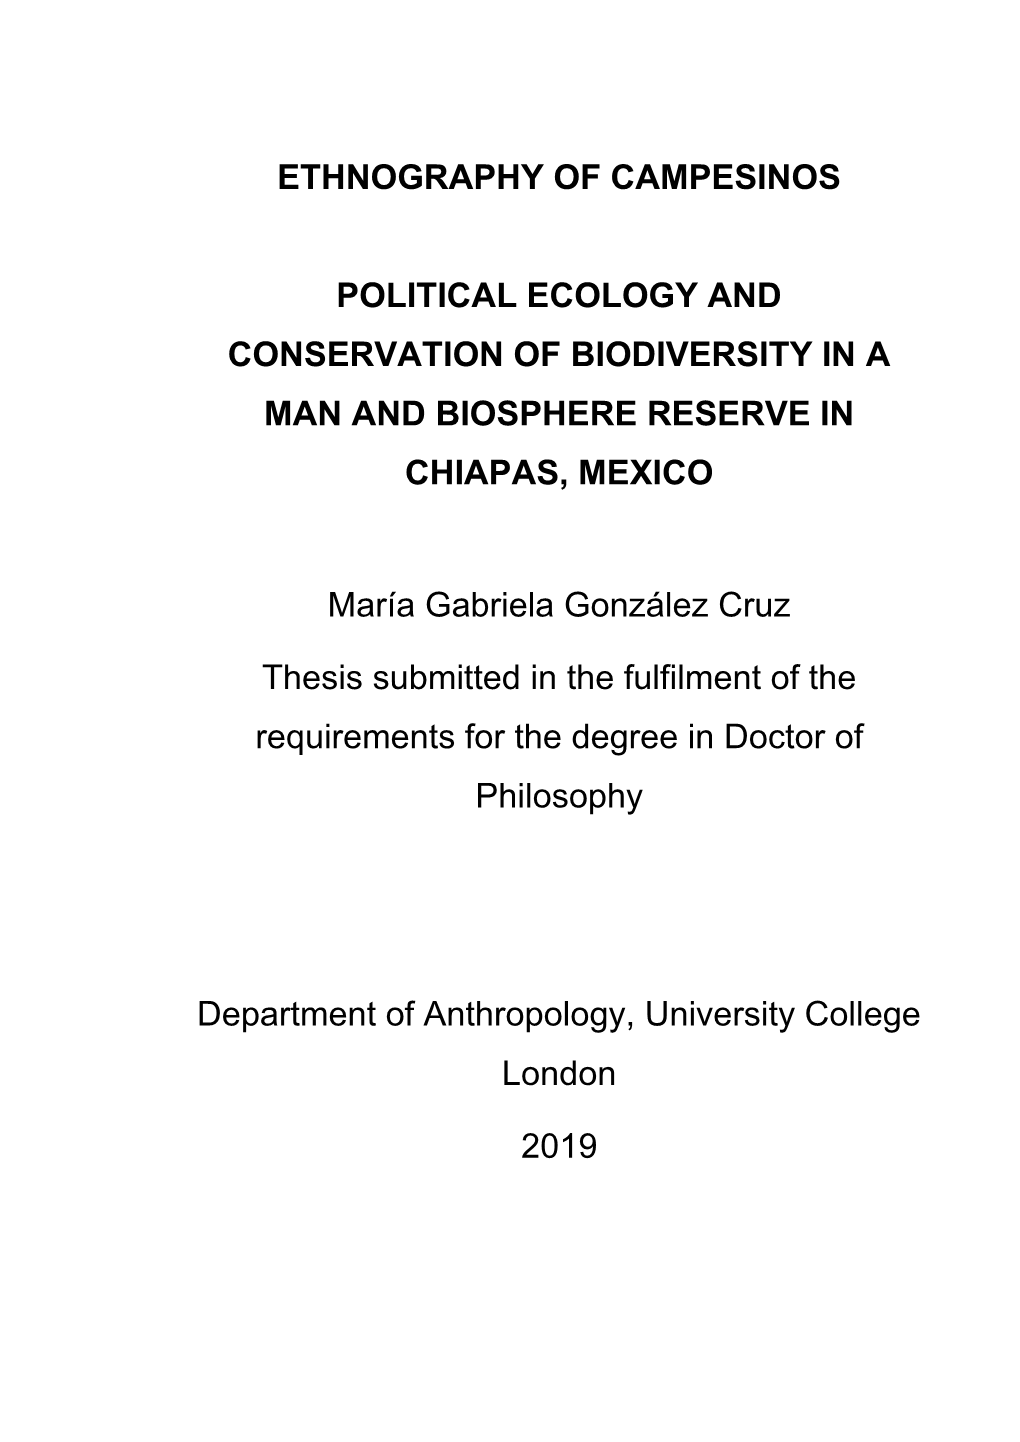 Ethnography of Campesinos Political Ecology and Conservation of Biodiversity in a Man and Biosphere Reserve in Chiapas, Mexico M